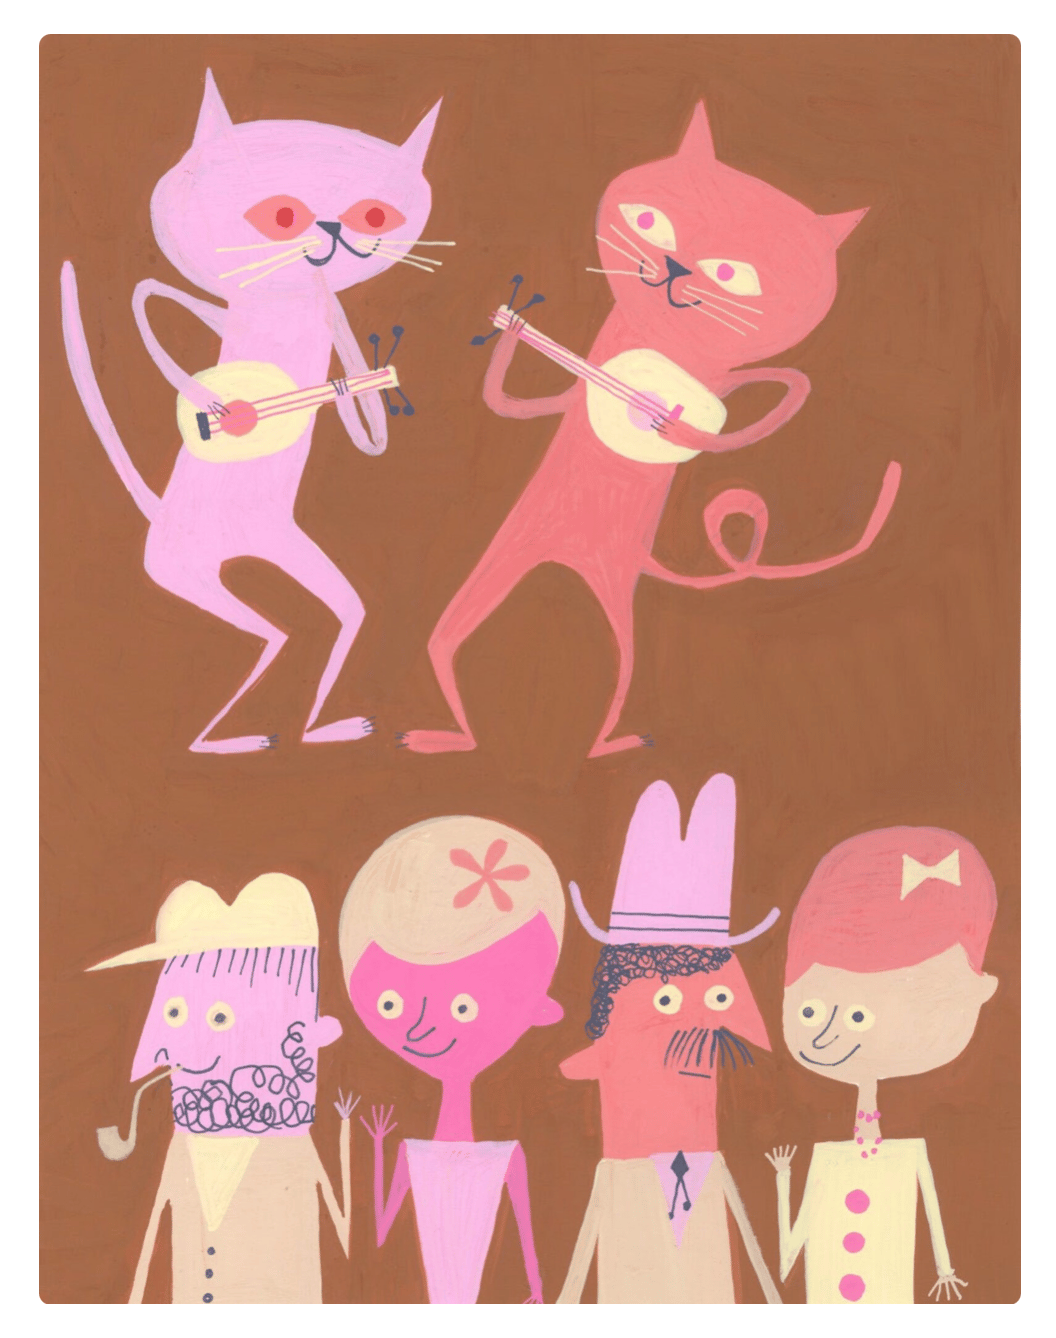 Image of Ukulele Cats' First Concert. Limited edition print by Matte Stephens.